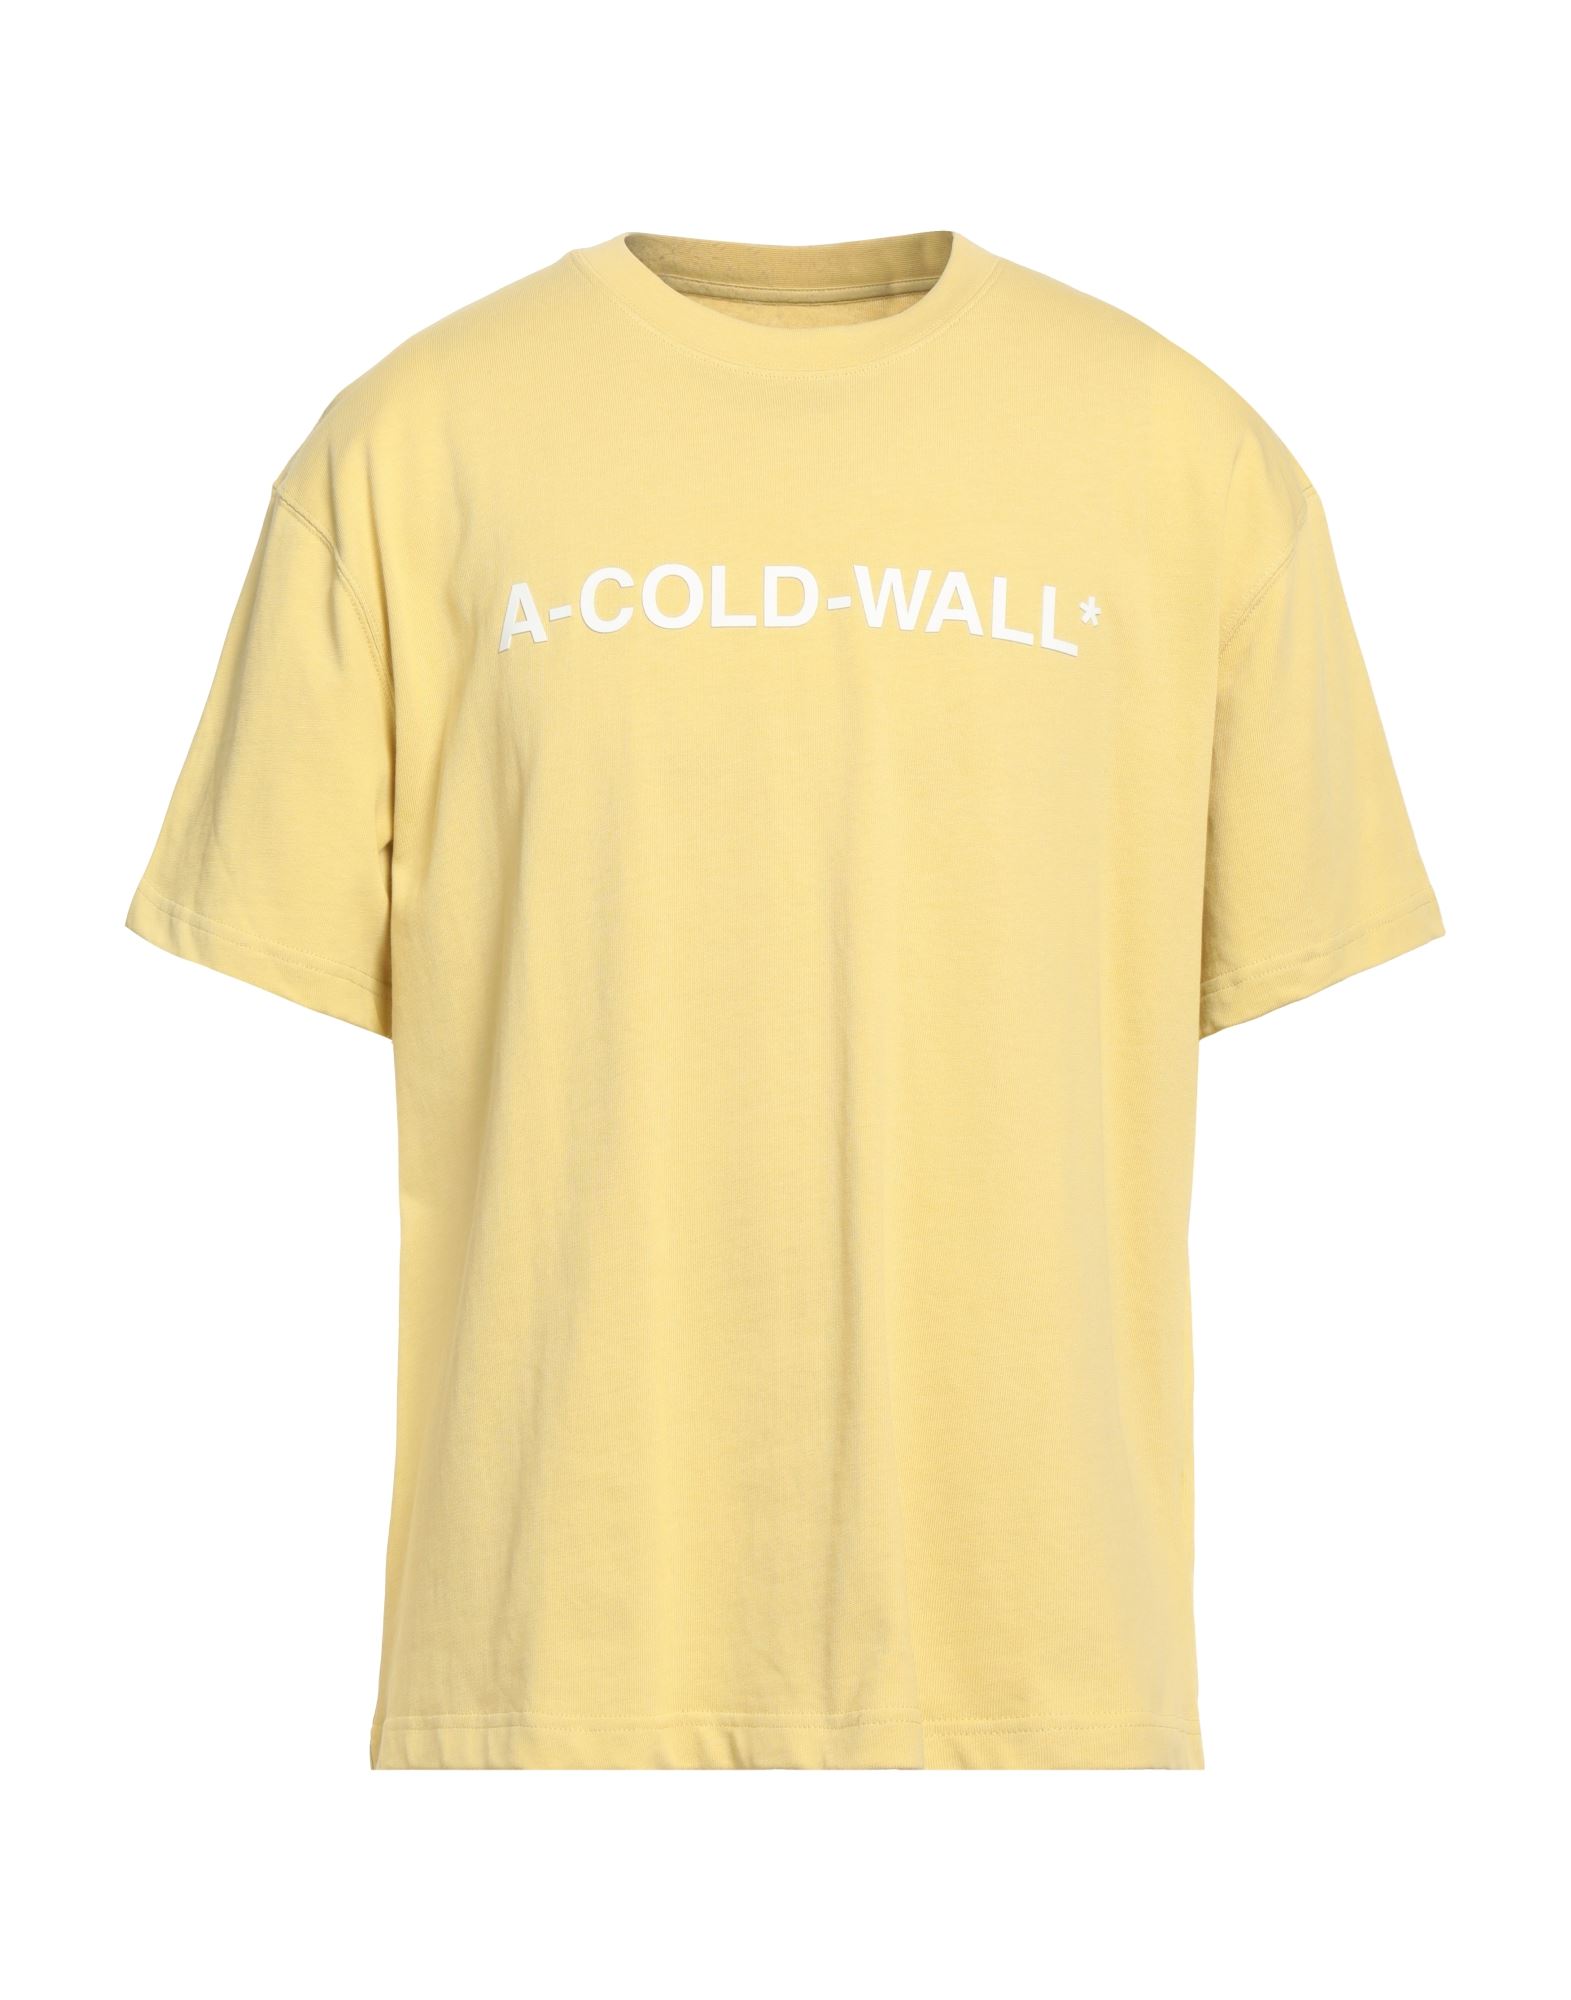 A-COLD-WALL* T-shirts Herren Hellgelb von A-COLD-WALL*